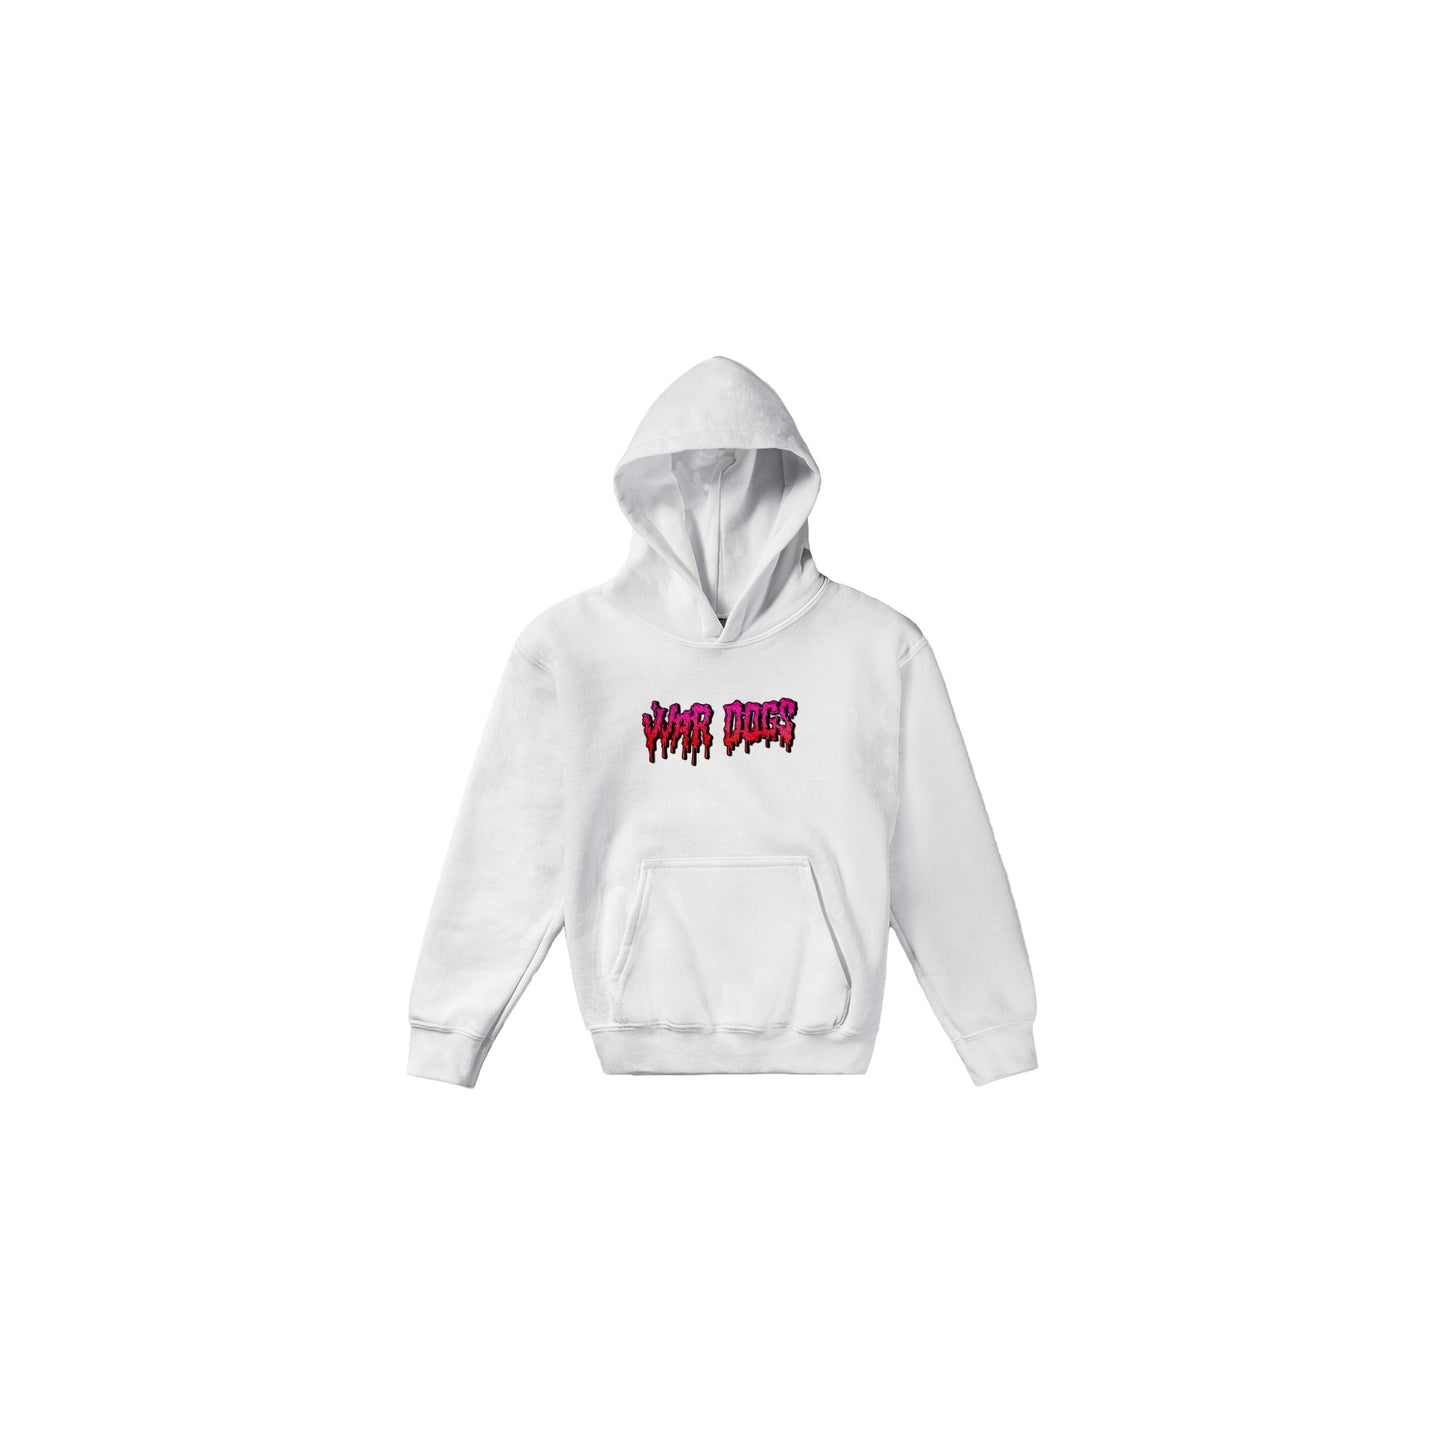 VVar Dogs Classic Kids Pullover Hoodie